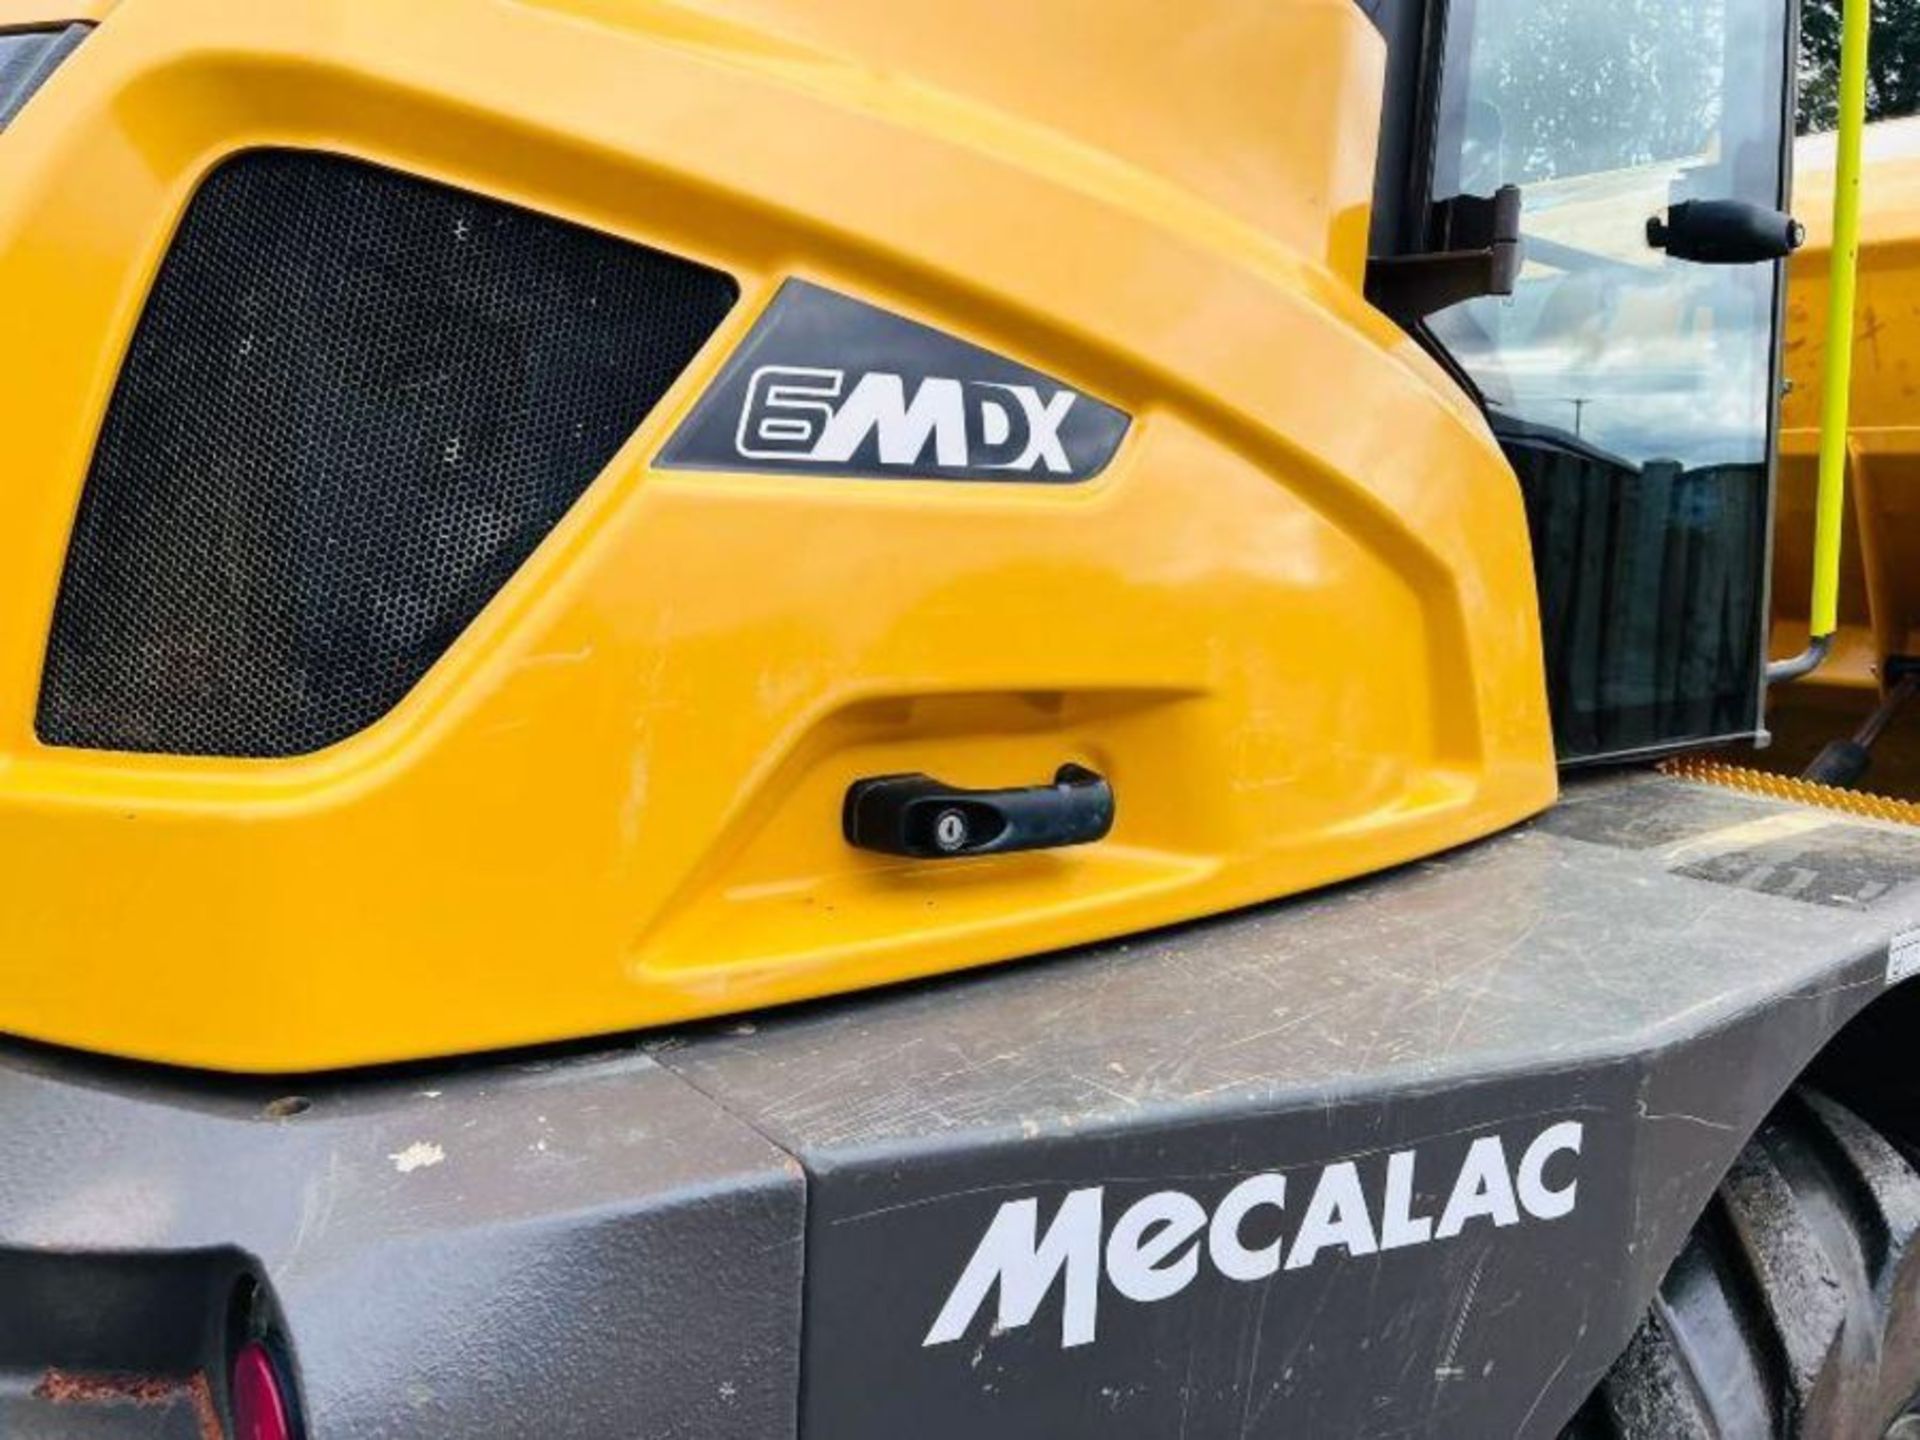 MECALAC 6MDX 4WD DUMPER *YEAR 2020, 1438 HOURS C/W AC CABIN - Image 3 of 15